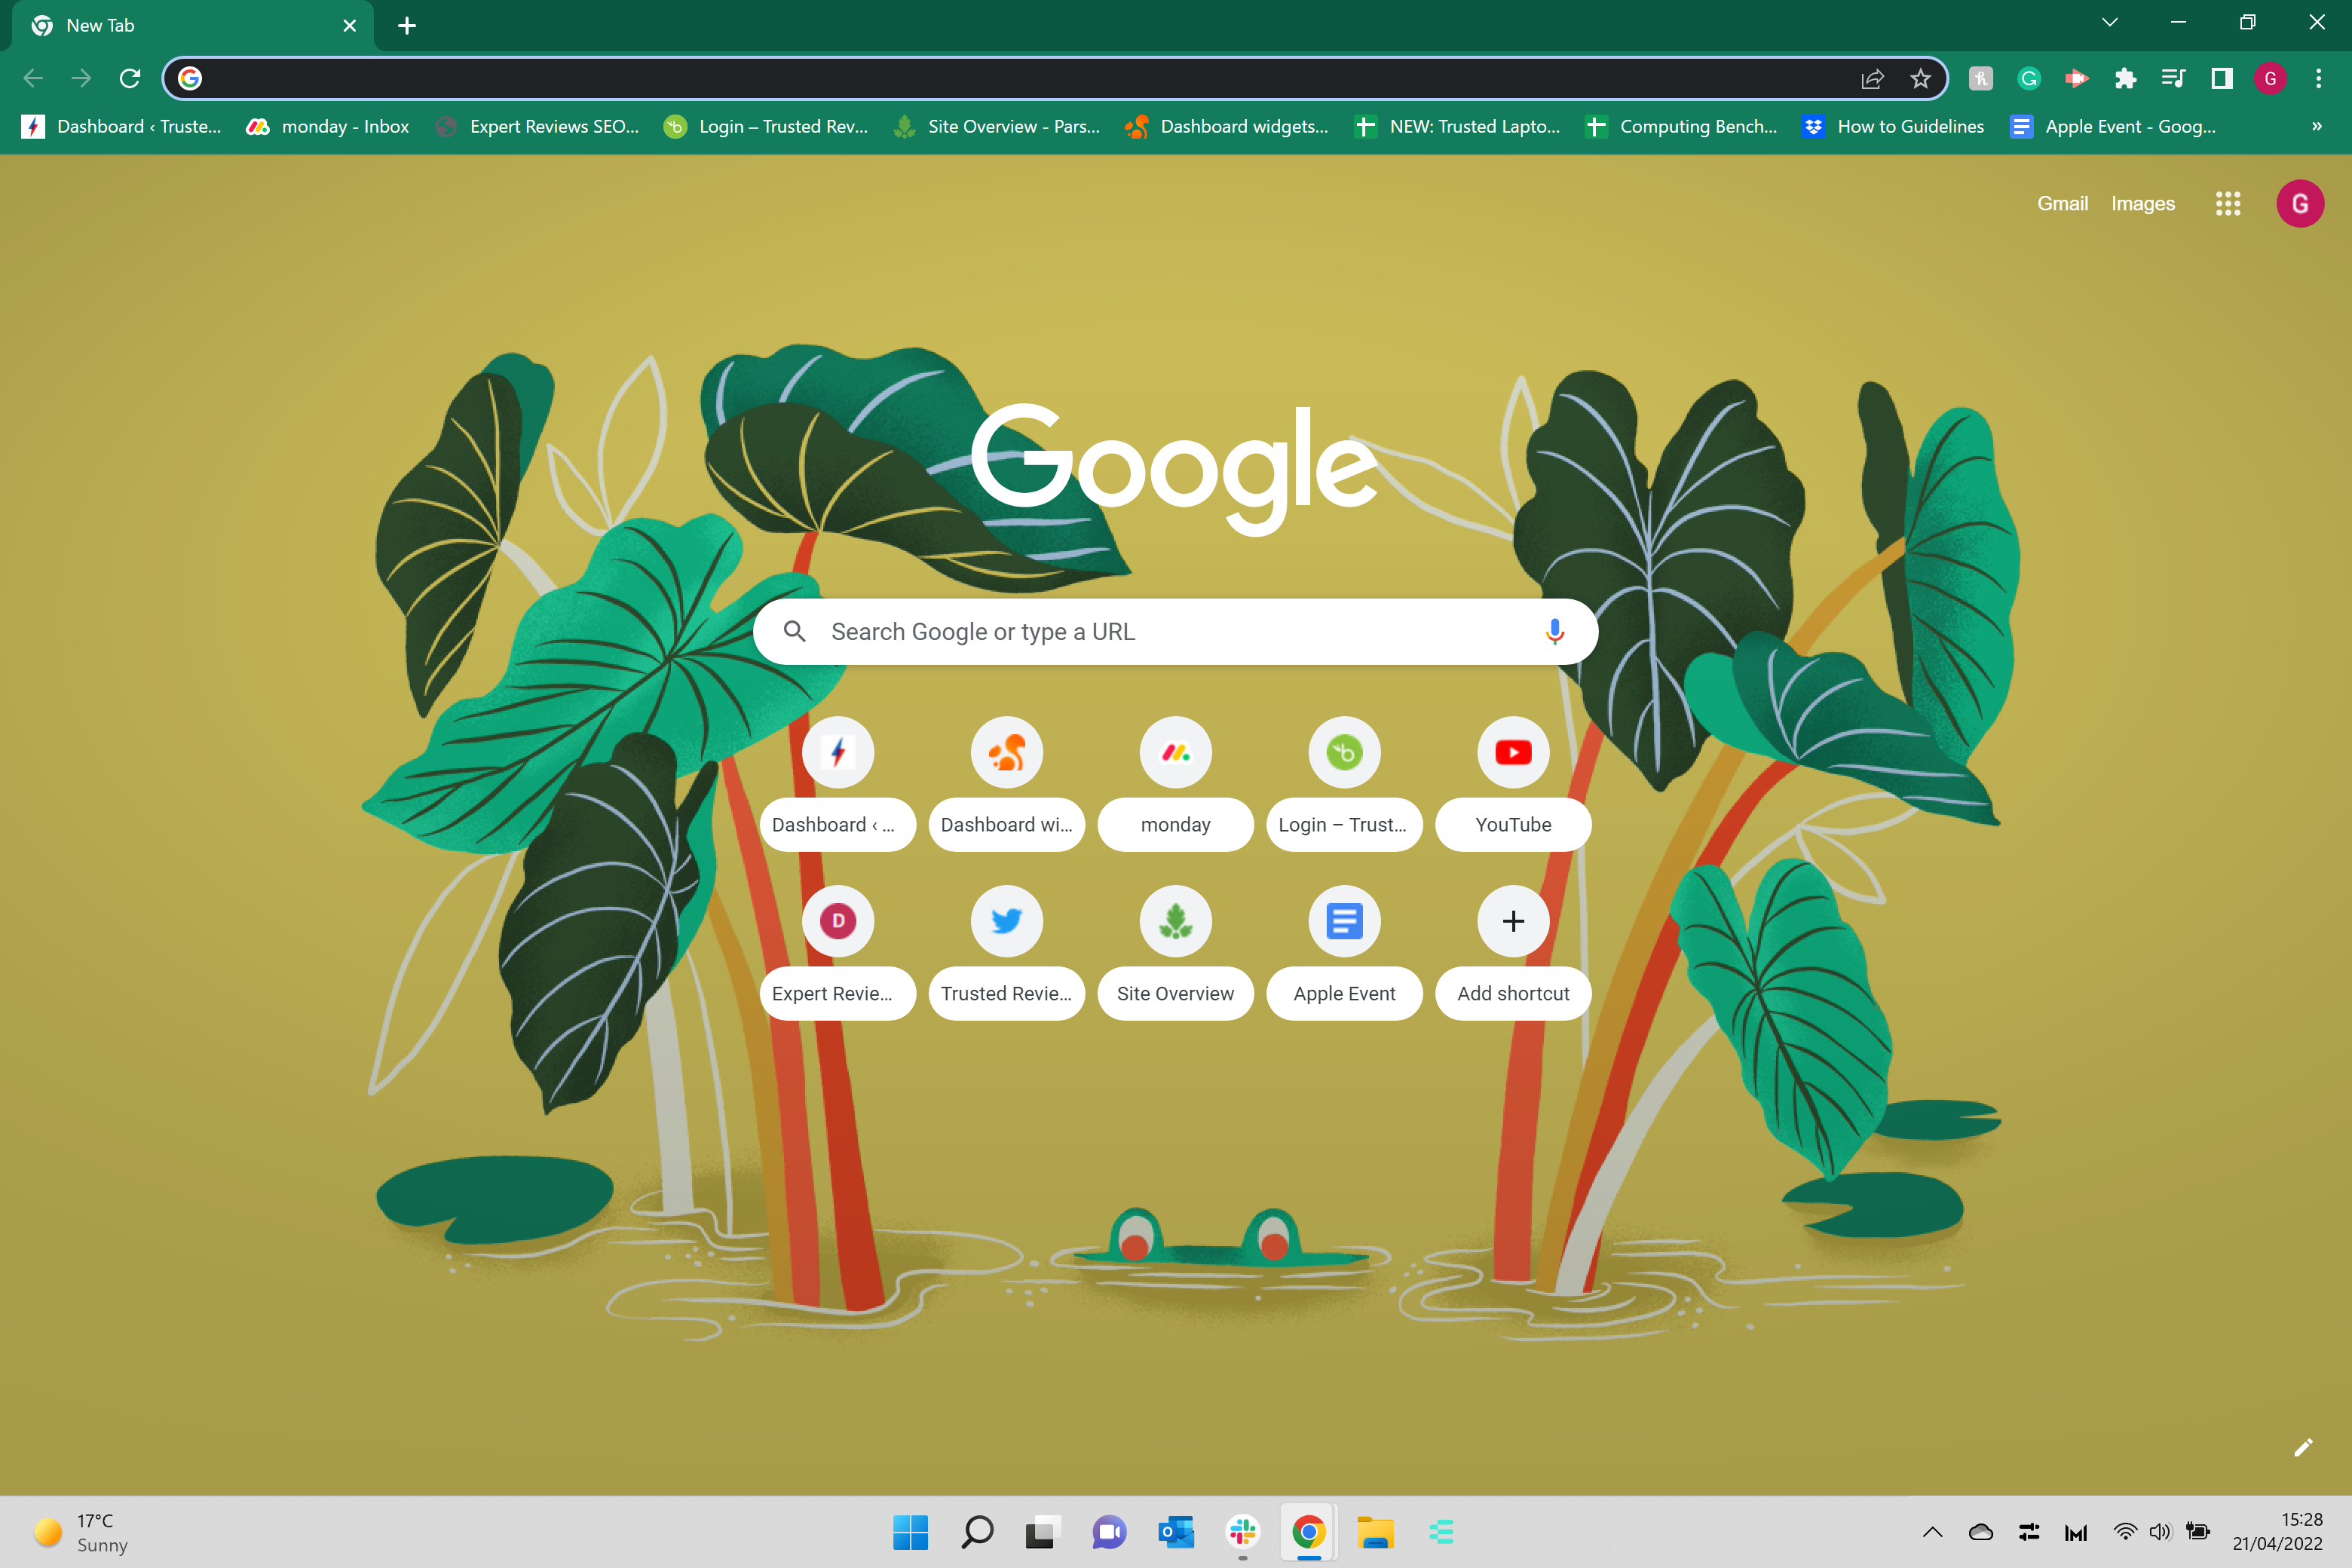 The Google Chrome page with a green theme